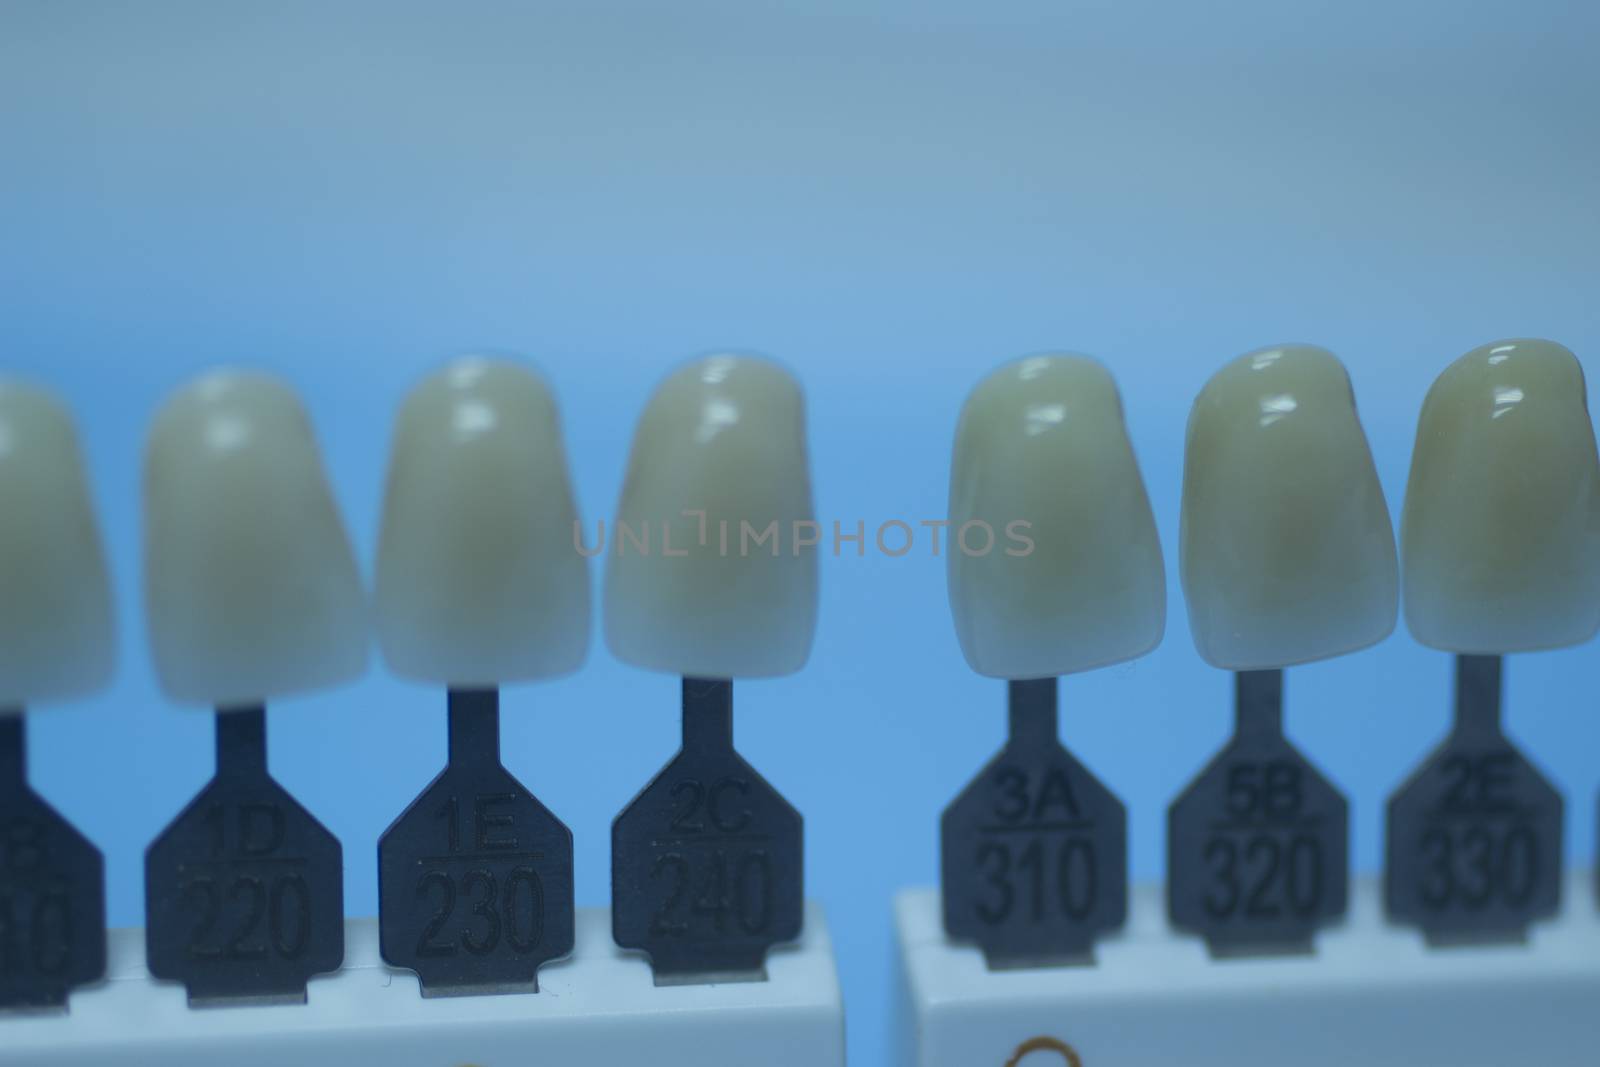 Dental tooth color guide for implants and crown colors by edwardolive